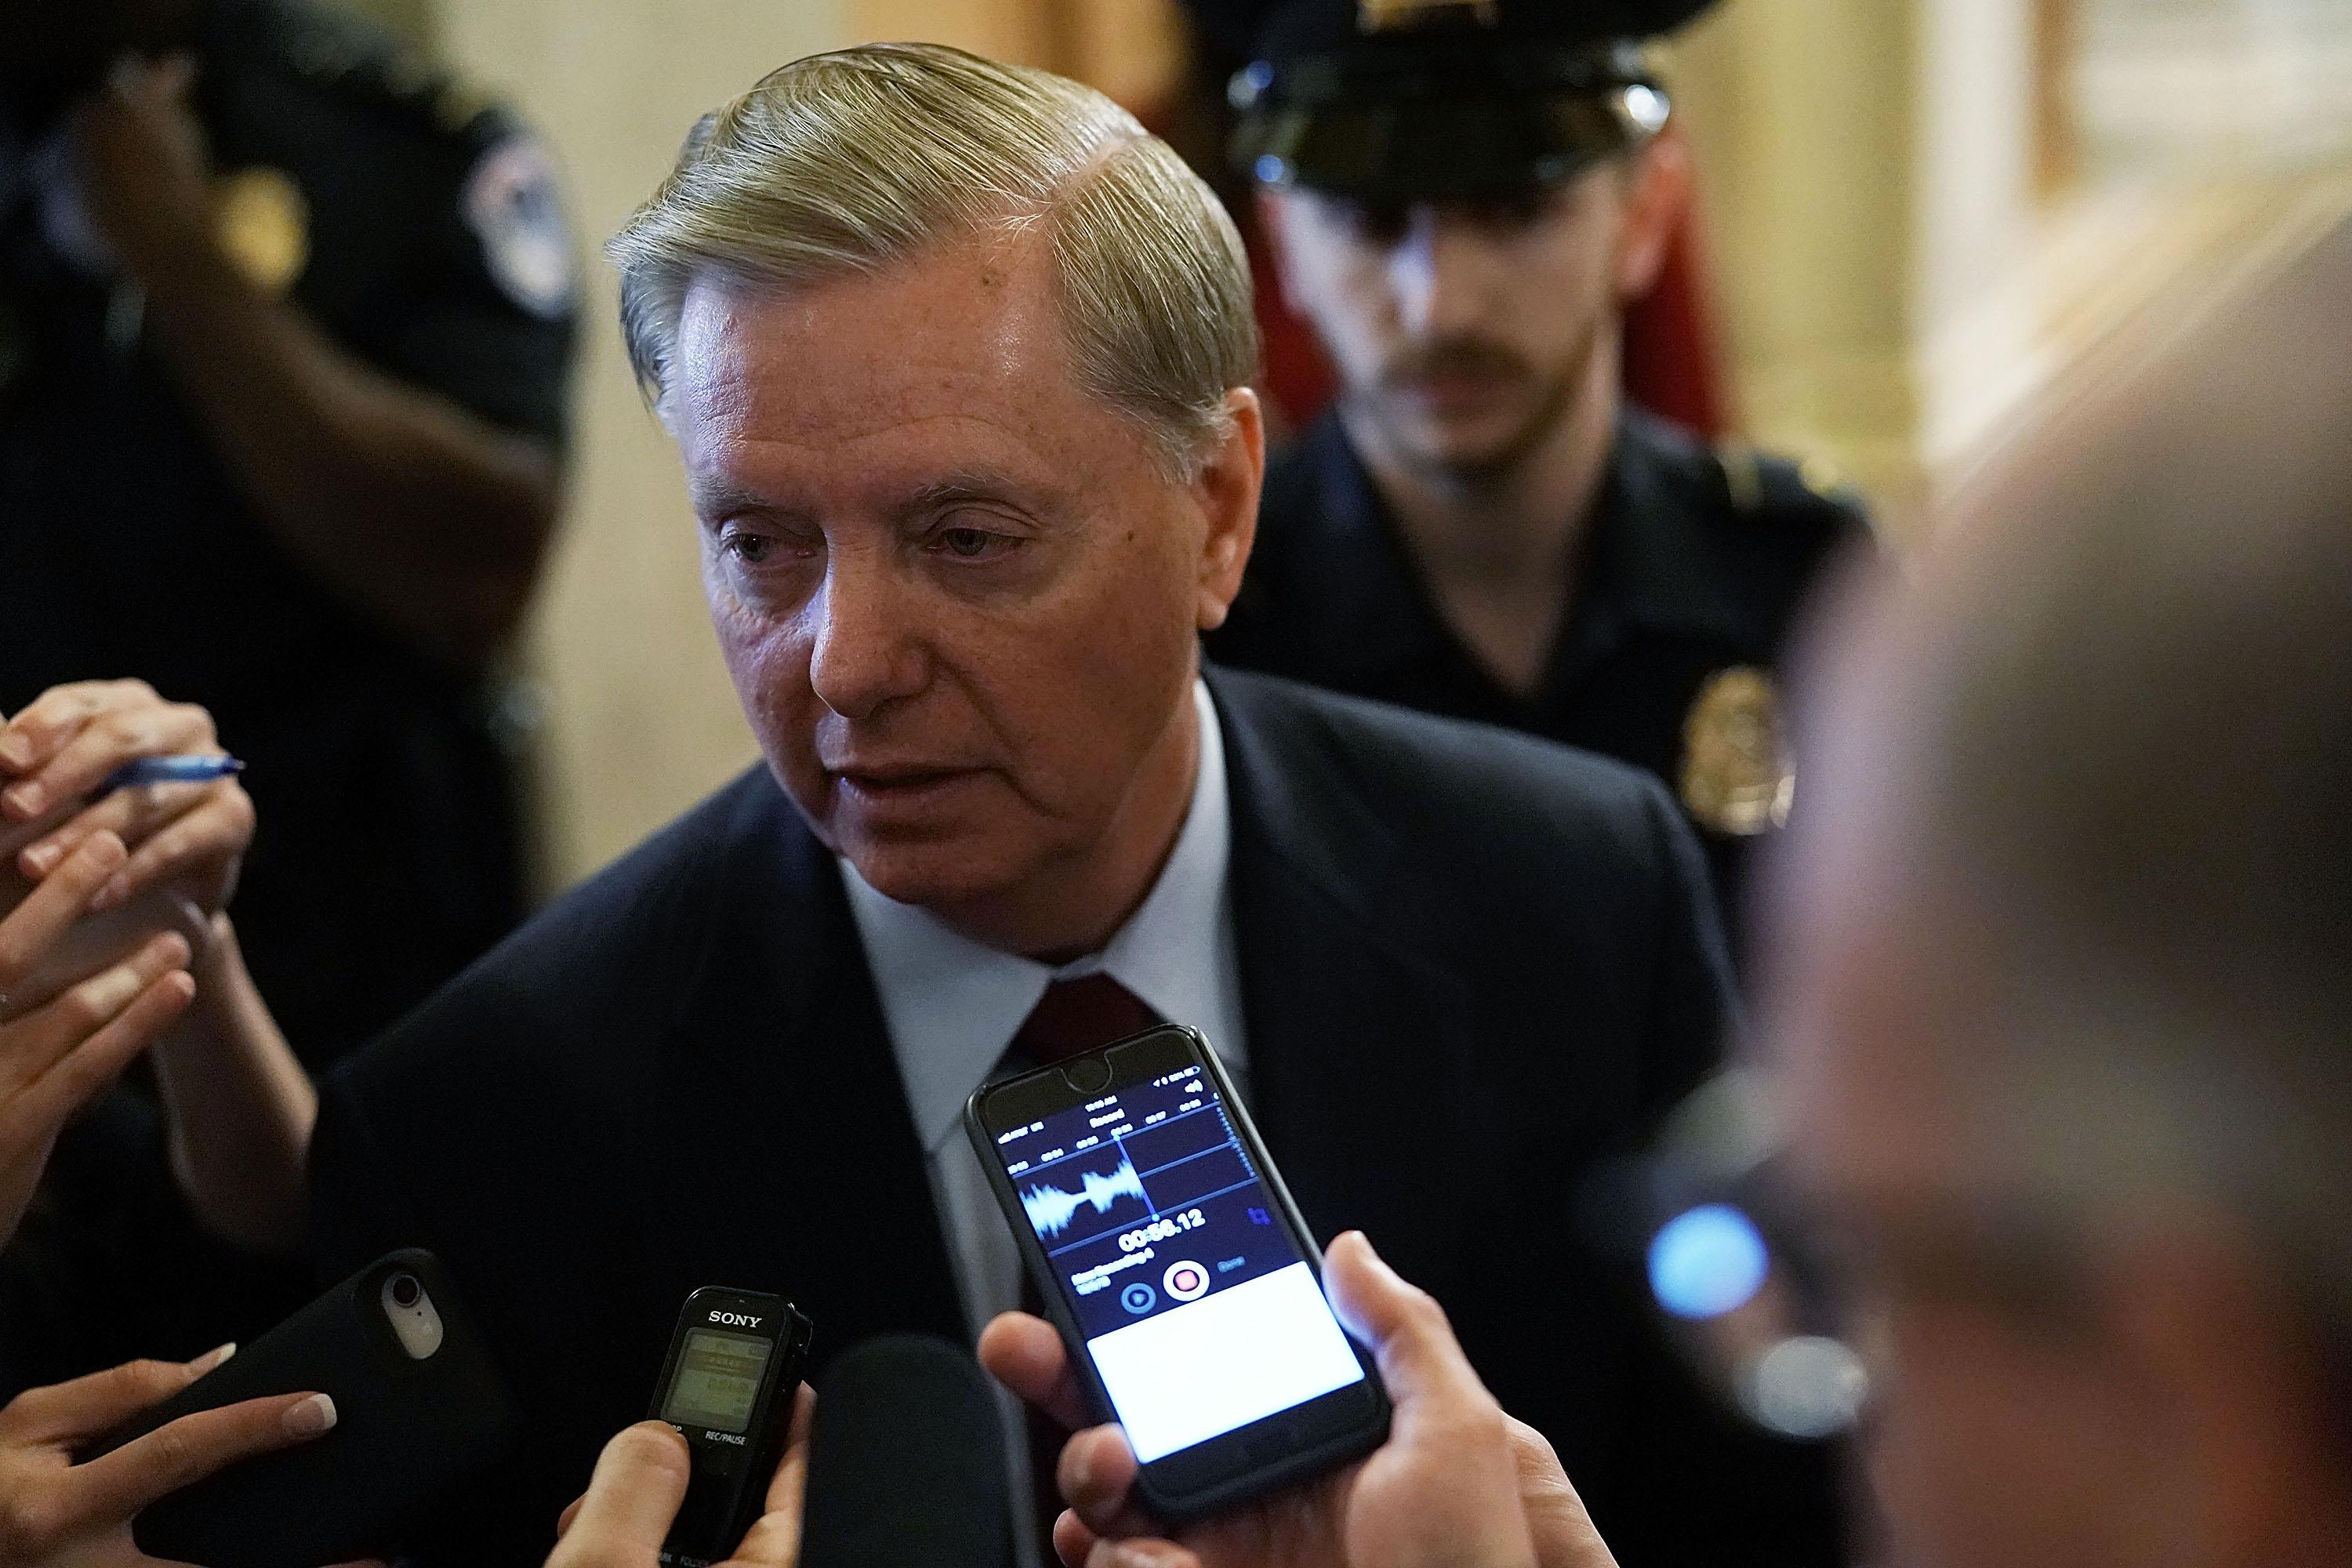 Sen. Lindsey Graham (R-SC) speaks to reporters at the U.S. Capitol, October 5, 2018 in Washington, D.C.